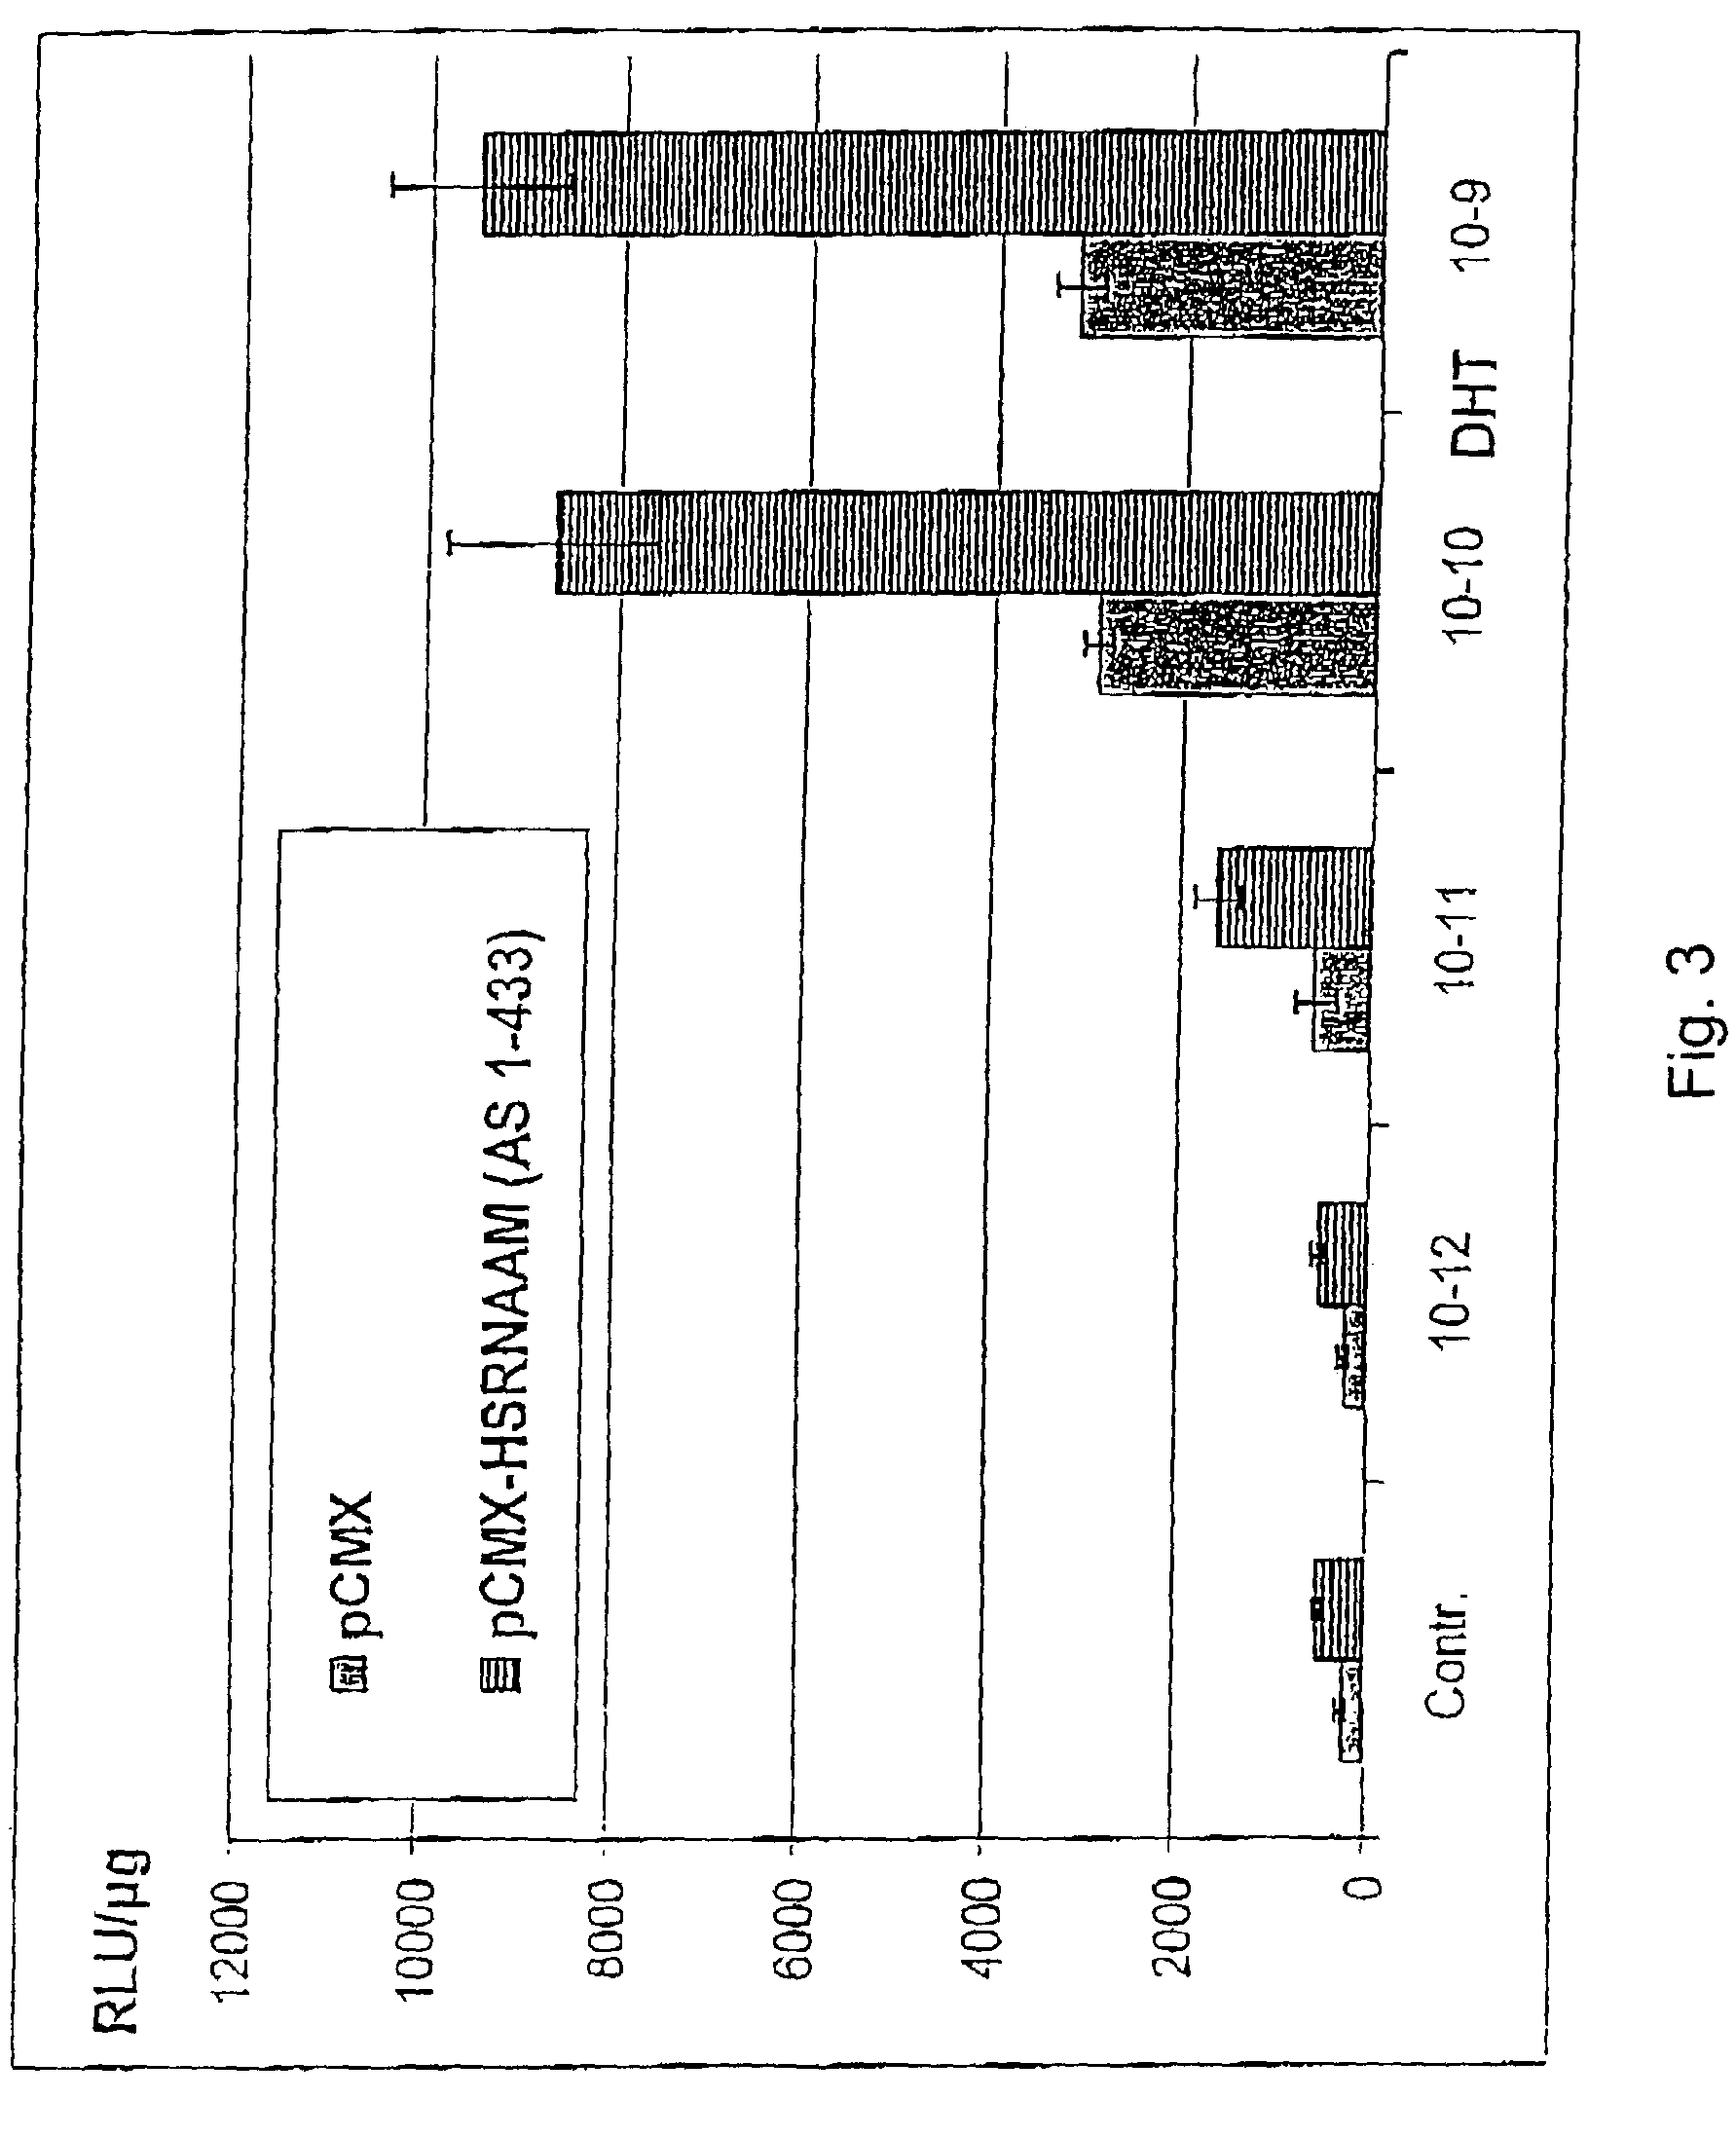 Method for testing hormonal effects of substances